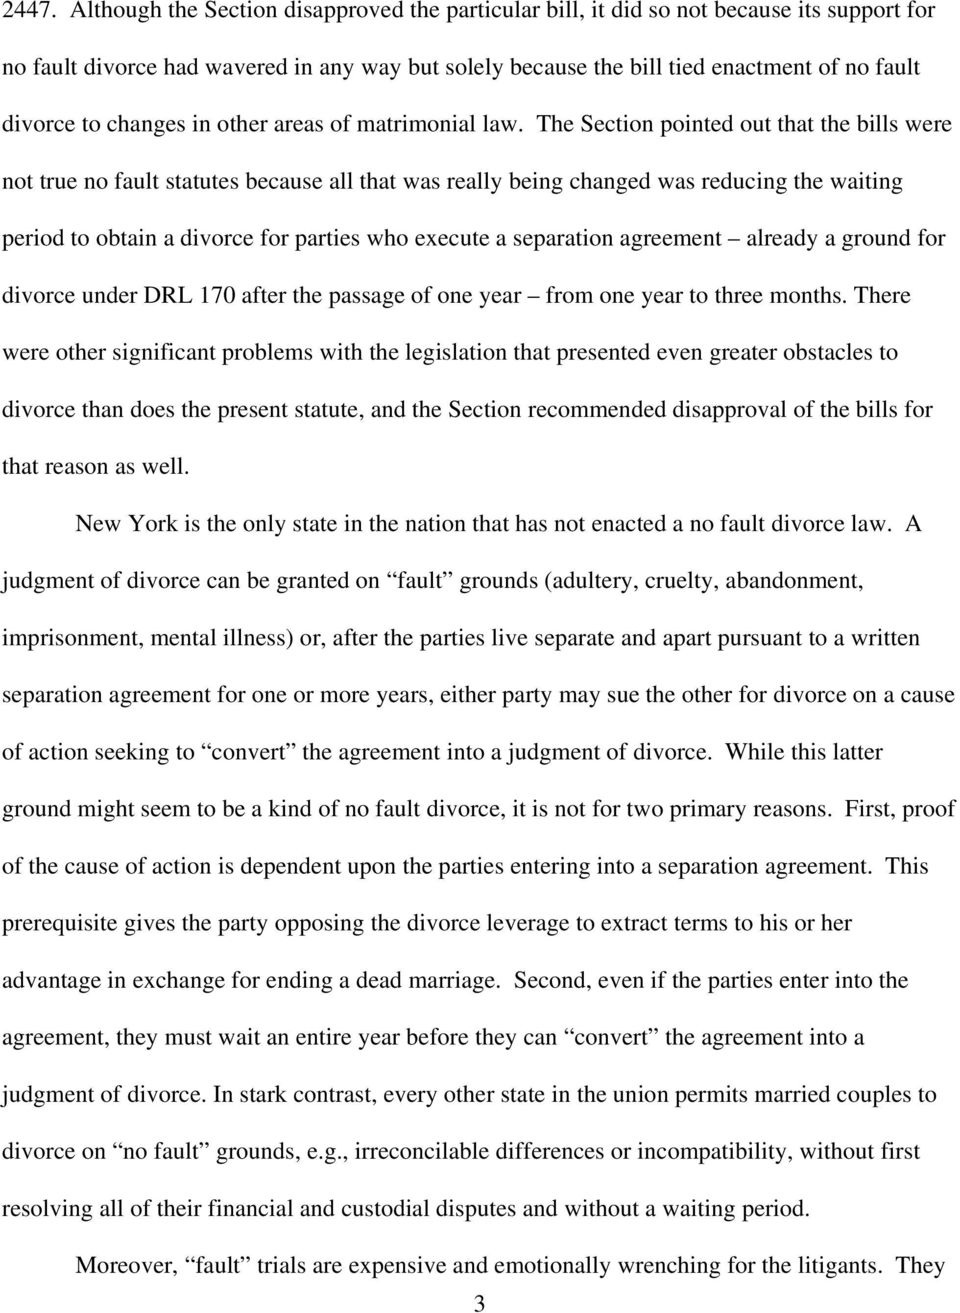 The Section pointed out that the bills were not true no fault statutes because all that was really being changed was reducing the waiting period to obtain a divorce for parties who execute a